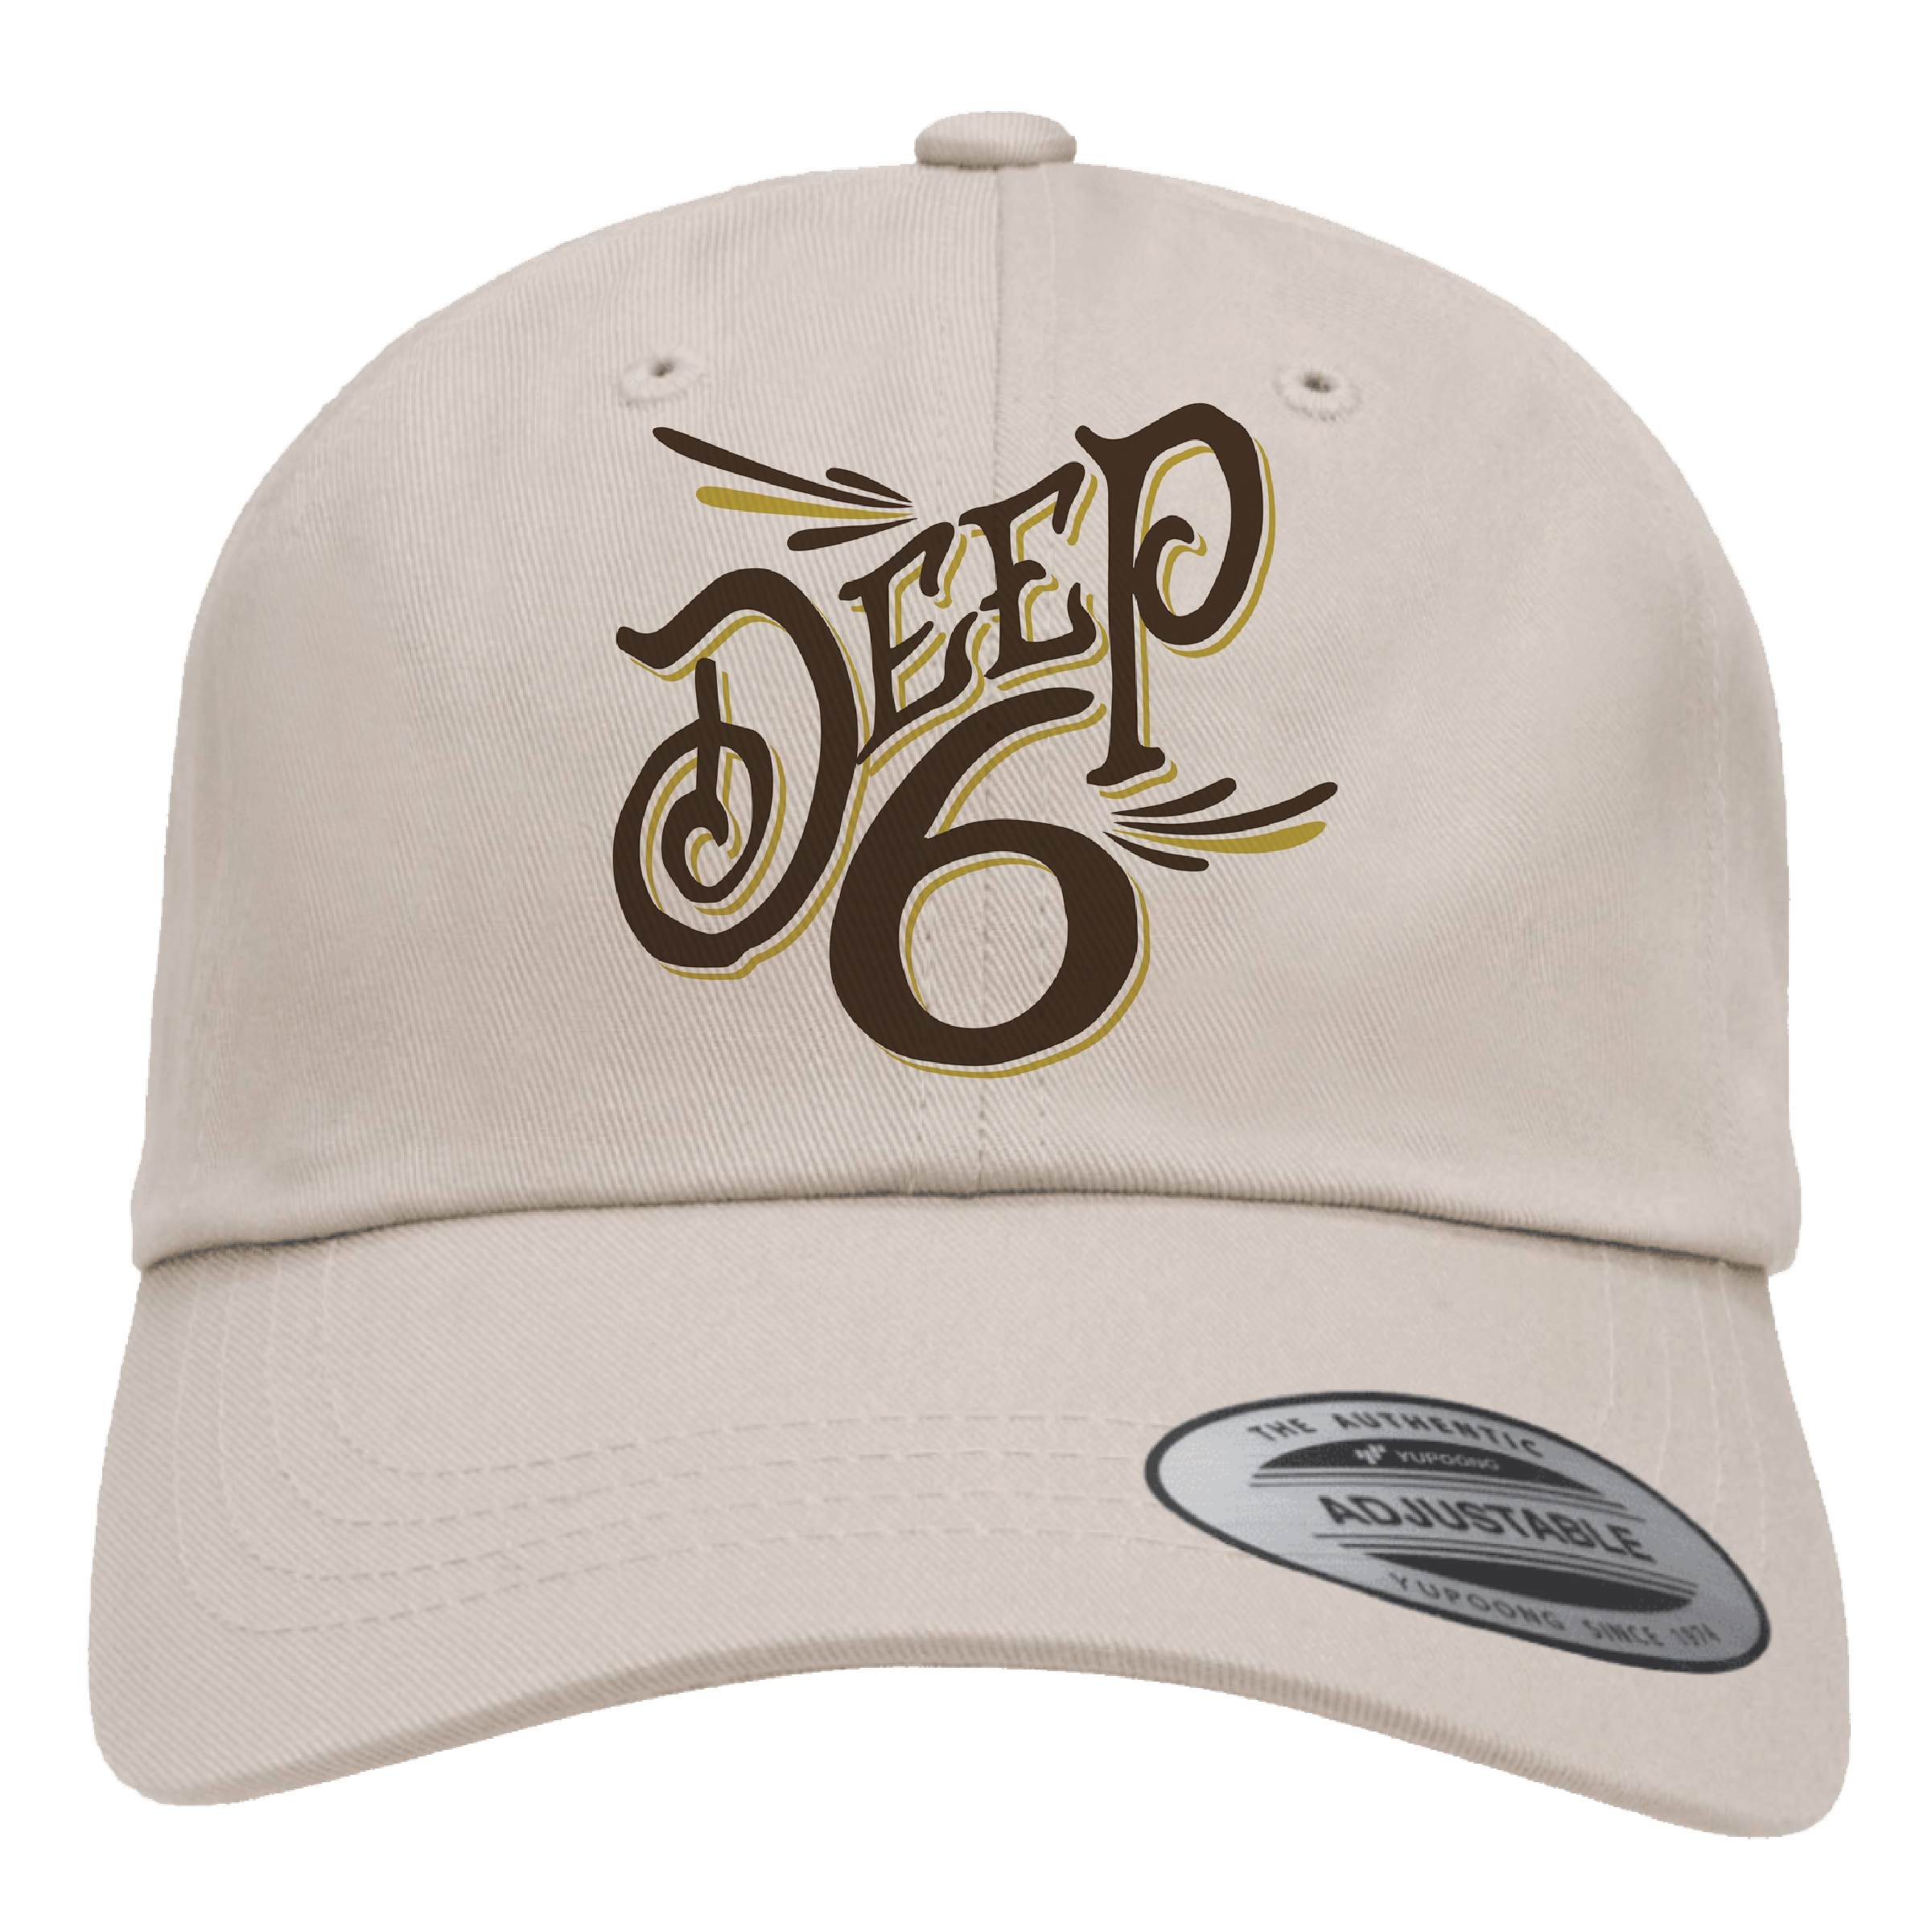 Deep 6 Dad Hat - PRE-SALE (SHIPPING/PICKUP WITH YOUR BOTTLE)